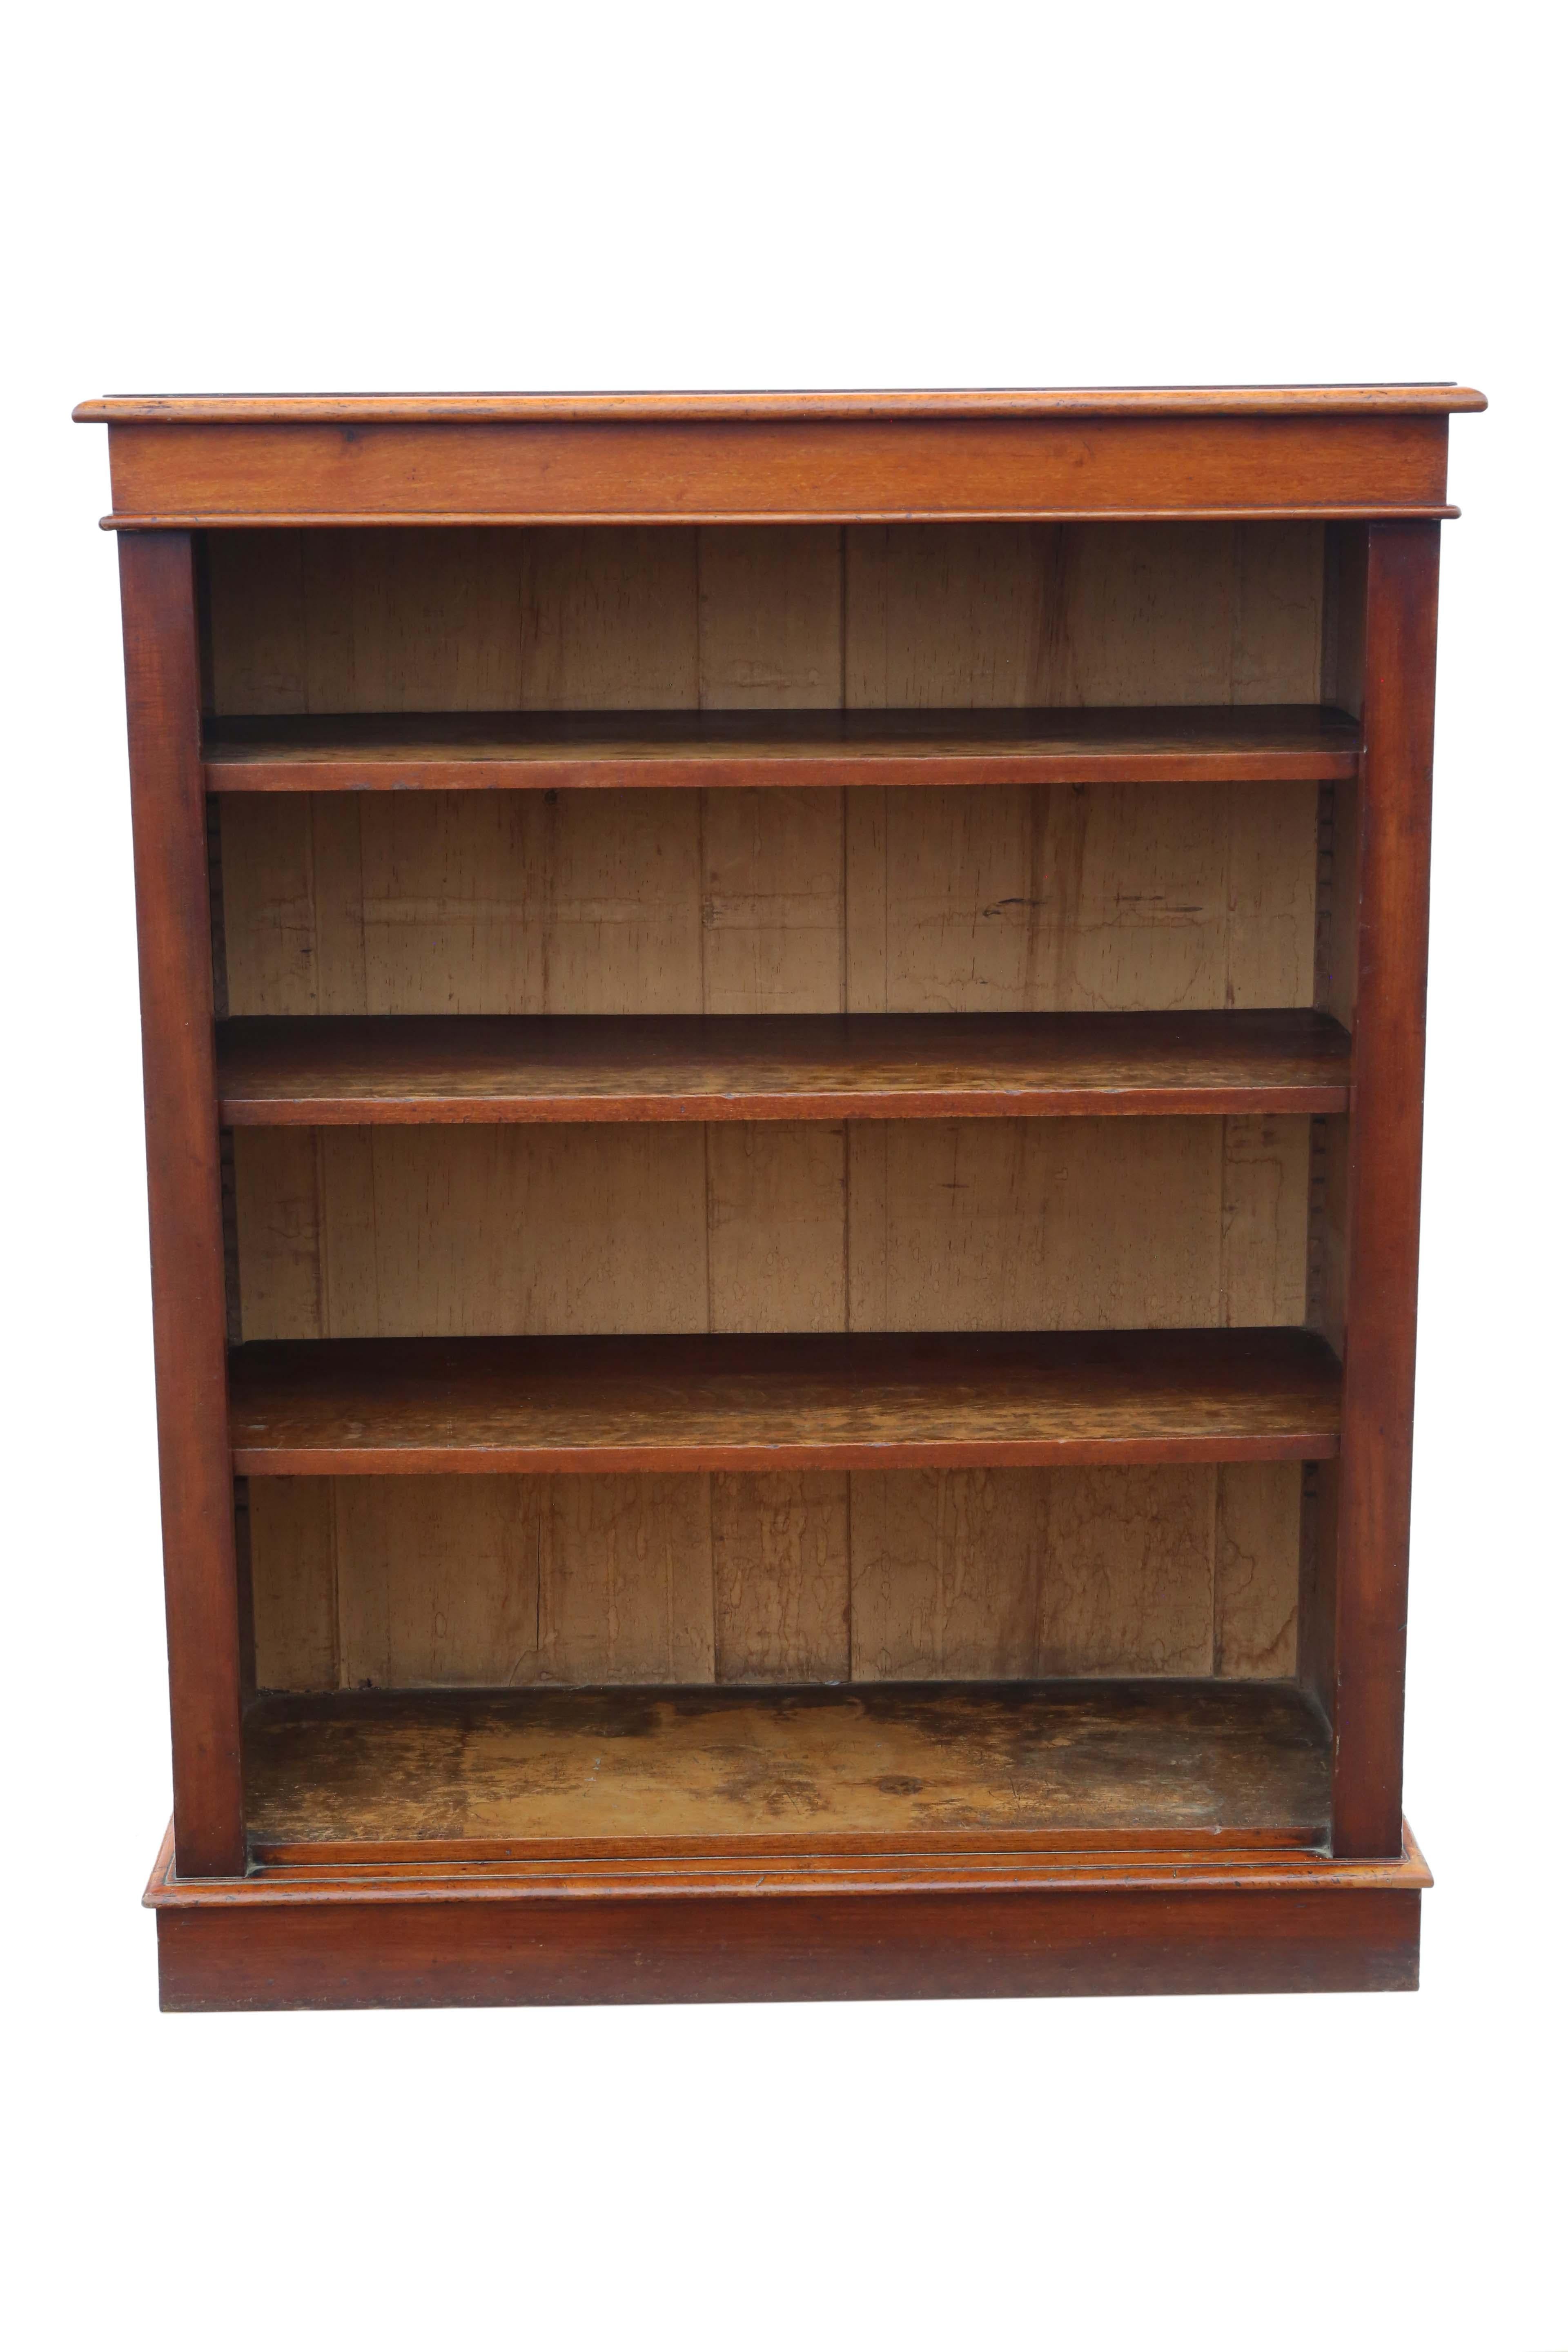 Antique large fine quality 19th Century mahogany adjustable bookcase.

This is a lovely quality bookcase, that is full of age, charm and character.

Solid, with no loose joints and no woodworm.

Would look amazing in the right location!

Overall